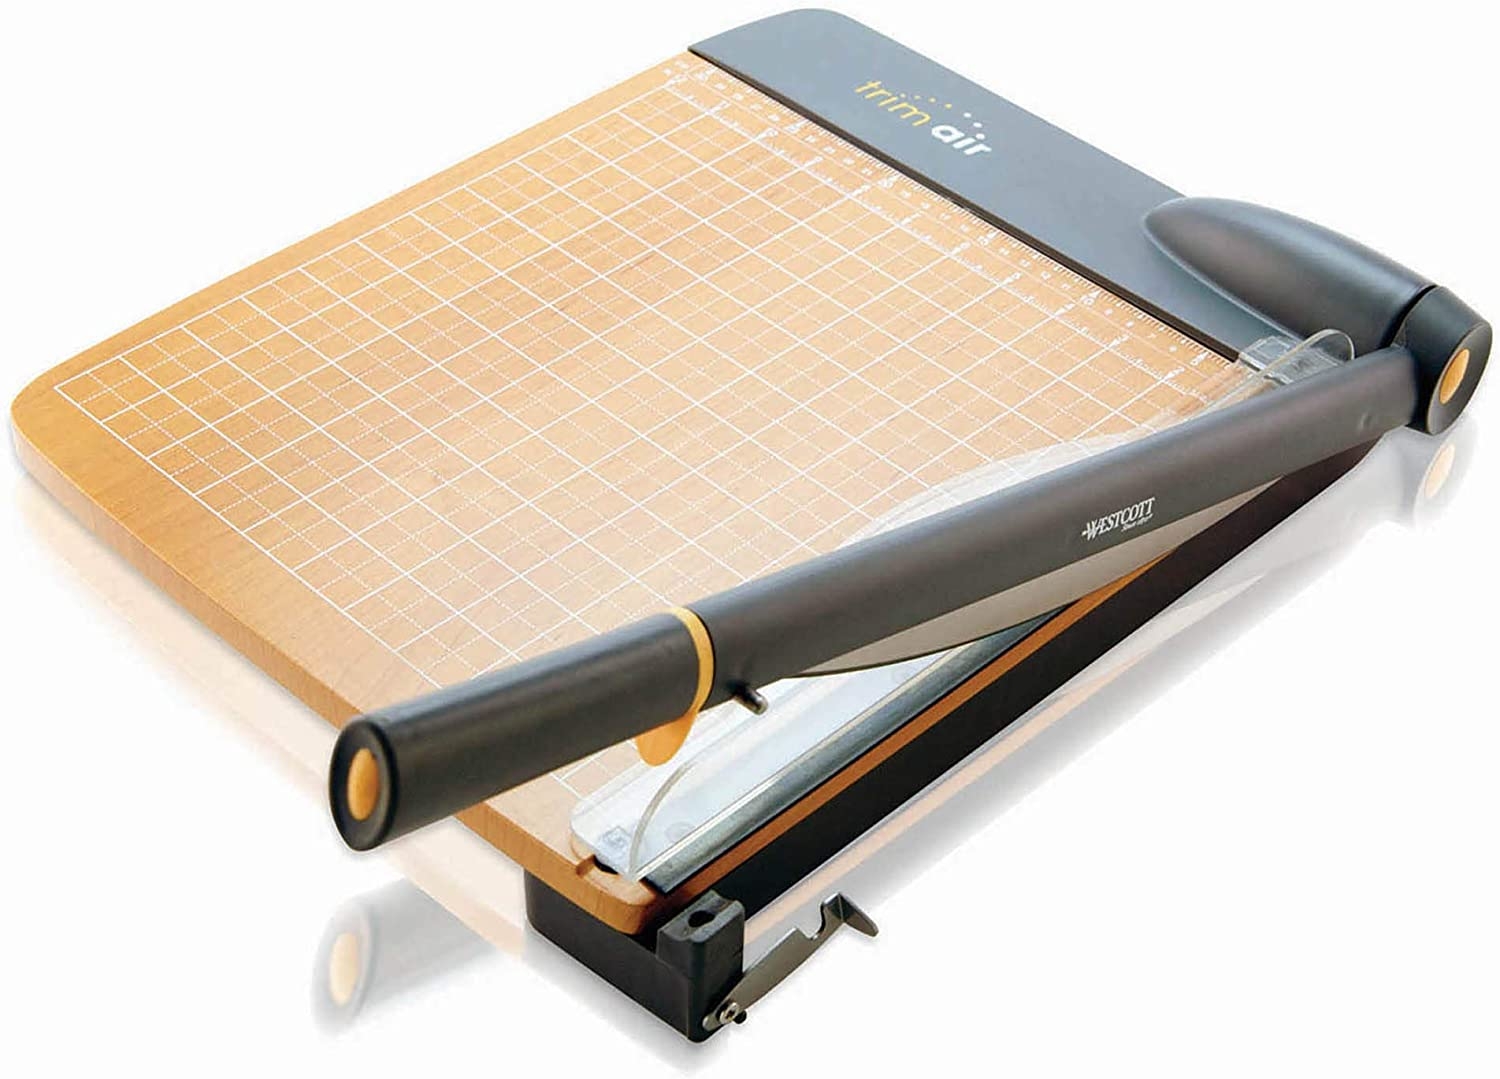 Westcott 12” TrimAir Anti-Microbial Wood Guillotine Paper Cutter & Paper Trimmer, 30 Sheet (15106) Import To Shop ×Product